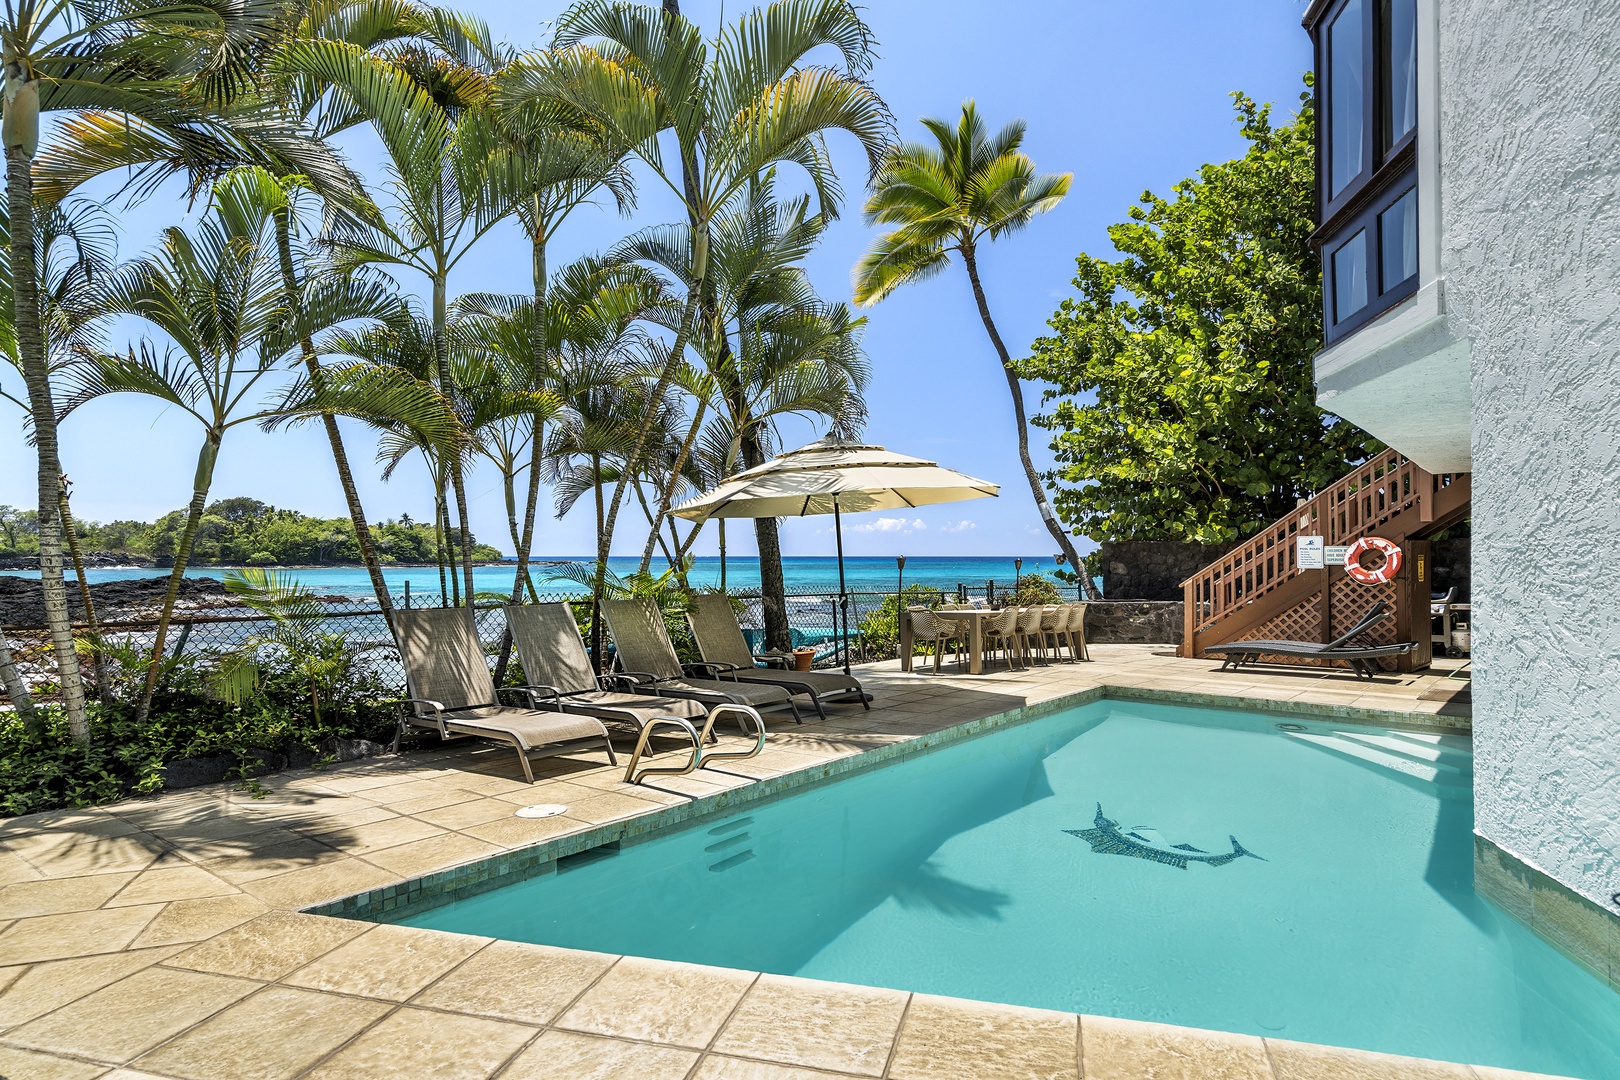 Kailua Kona Vacation Rentals, Kona's Shangri La - Perfectly placed pool with a max depth of 6ft